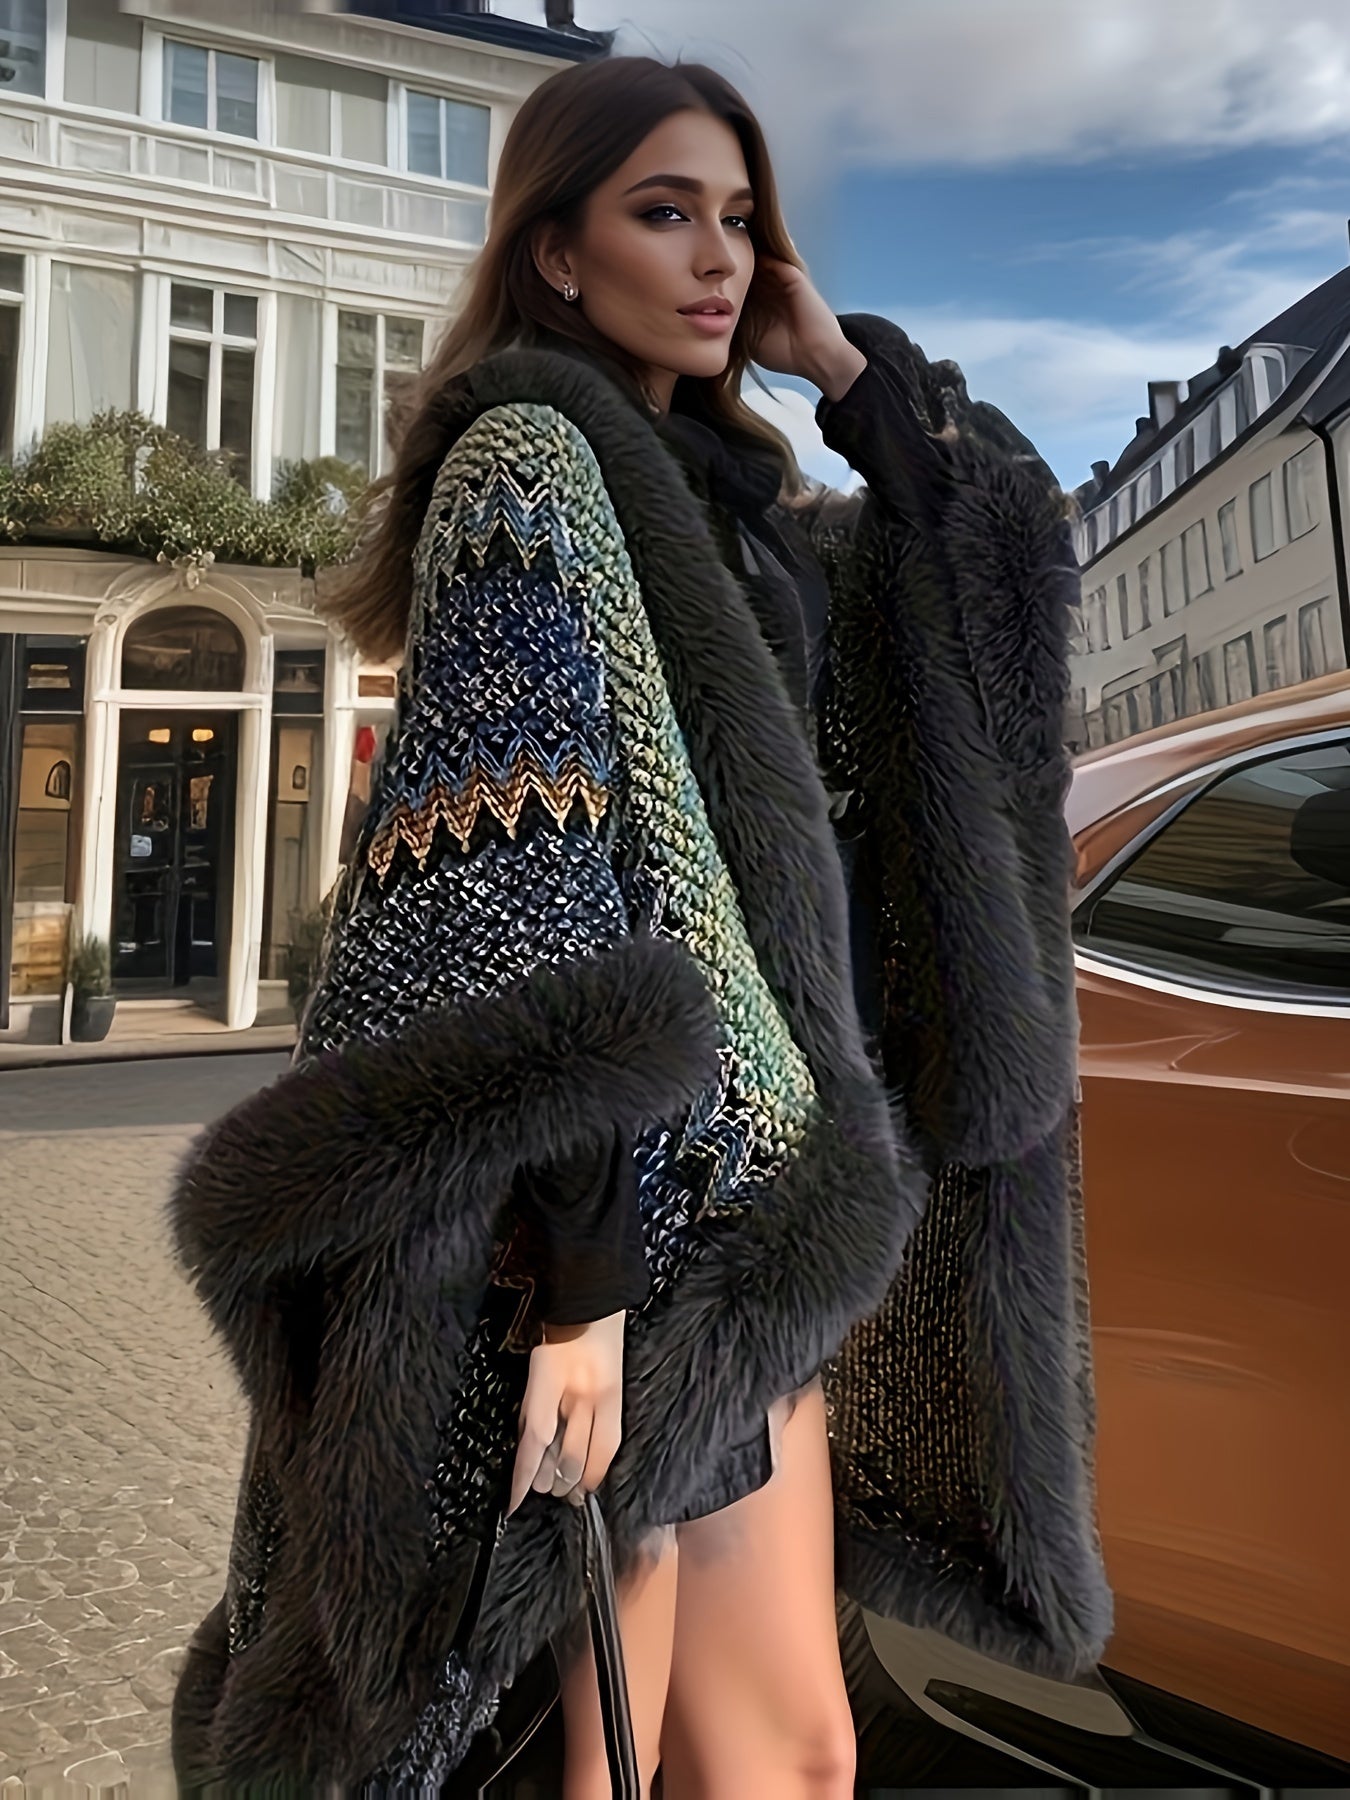 A woman stands outdoors wearing the Maramalive™ Plus Size Fuzzy Trim Cape Cardigan, Casual Open Front Shawl Outwear, Women's Plus Size Clothing which is elegant and colorful with a fur trim and geometric pattern. She is beside a vehicle and in front of a building on a cobblestone street, embodying the chic style of the Fall/Winter season.